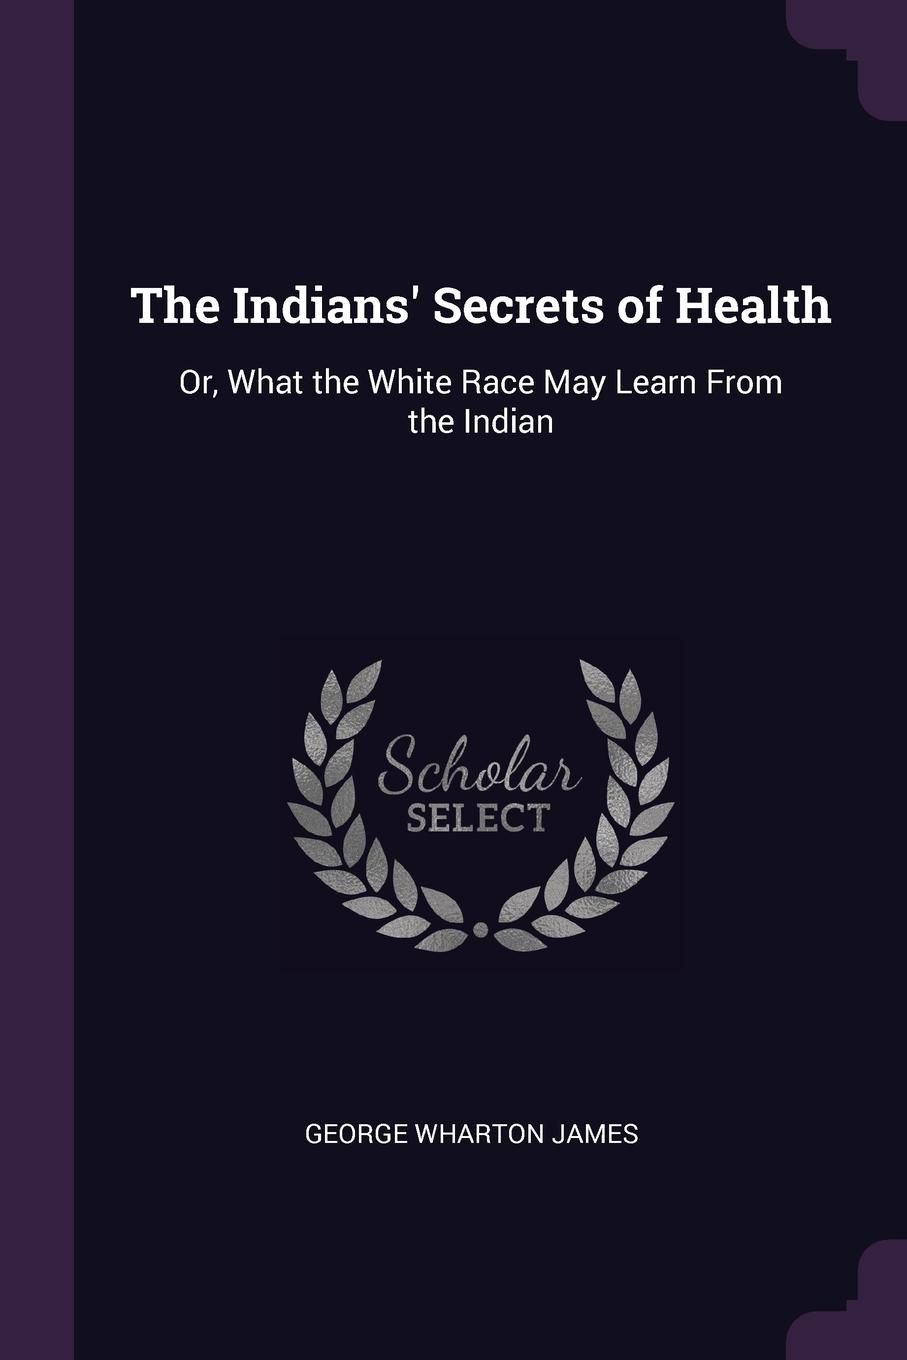 The Indians. Secrets of Health. Or, What the White Race May Learn From the Indian